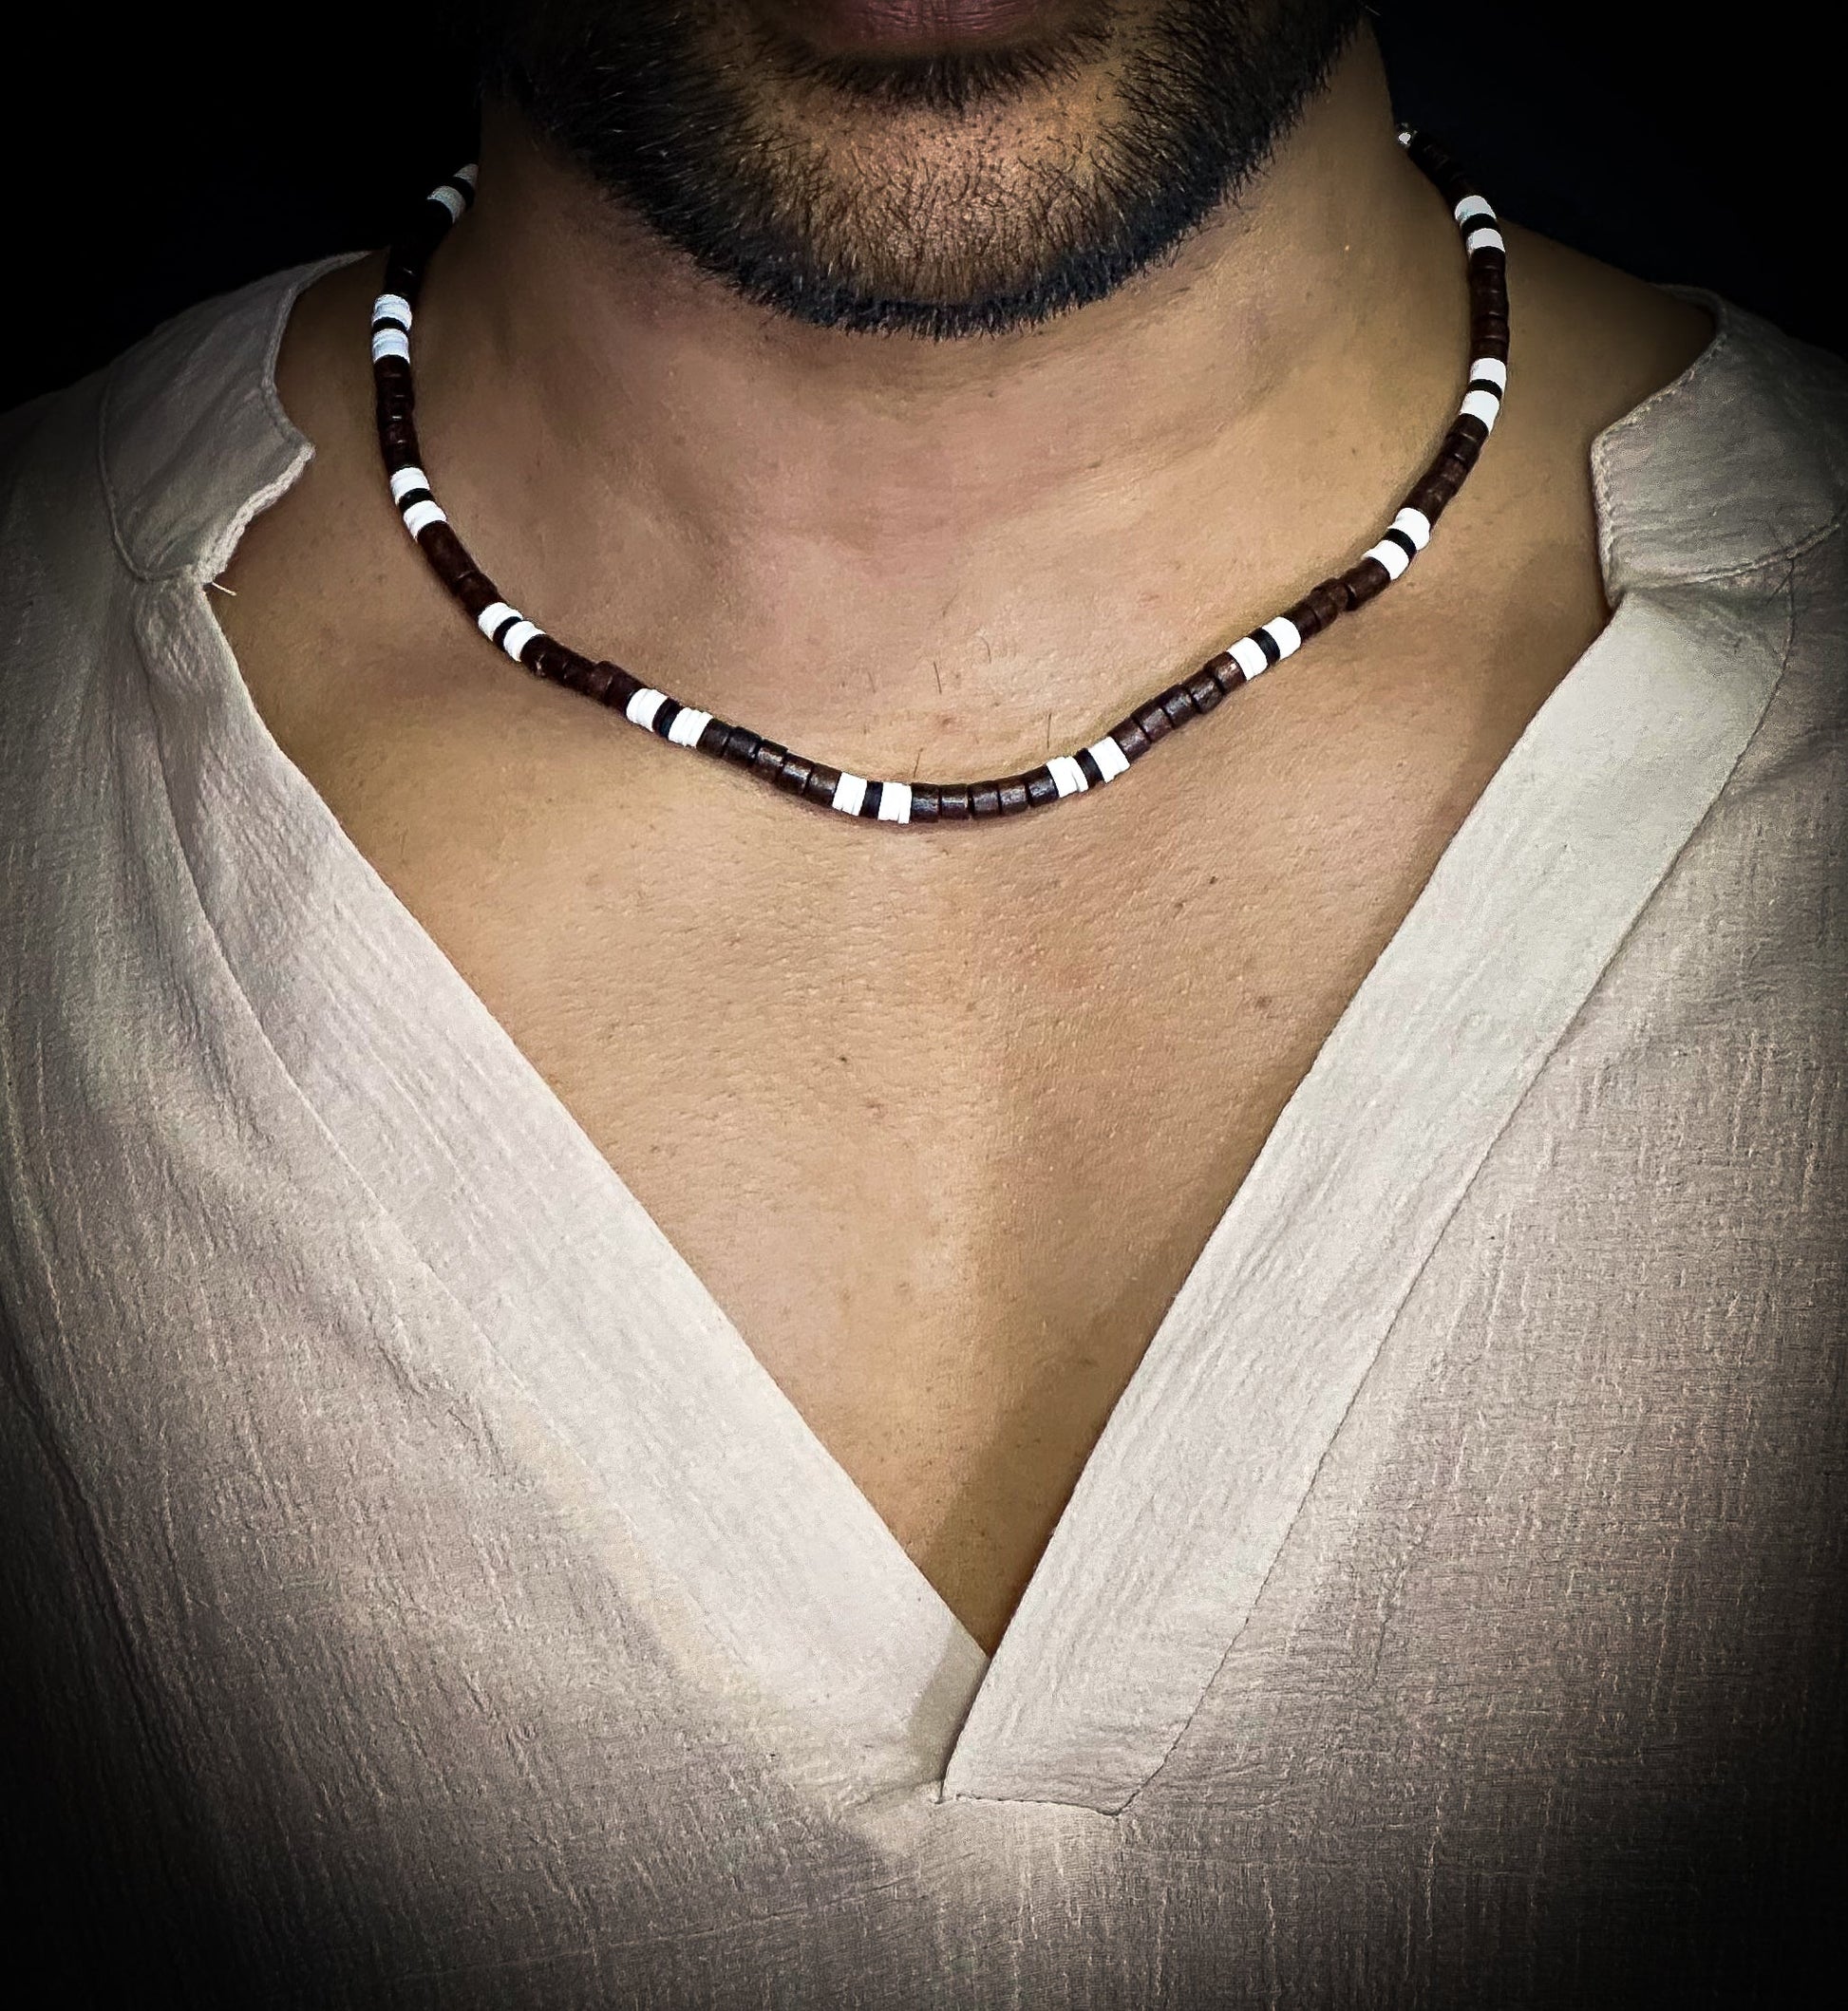 Brown Tiger Coco - Seed Beaded Necklace Brown And White Puka Shells Stylish For Men Boys (21 Inches